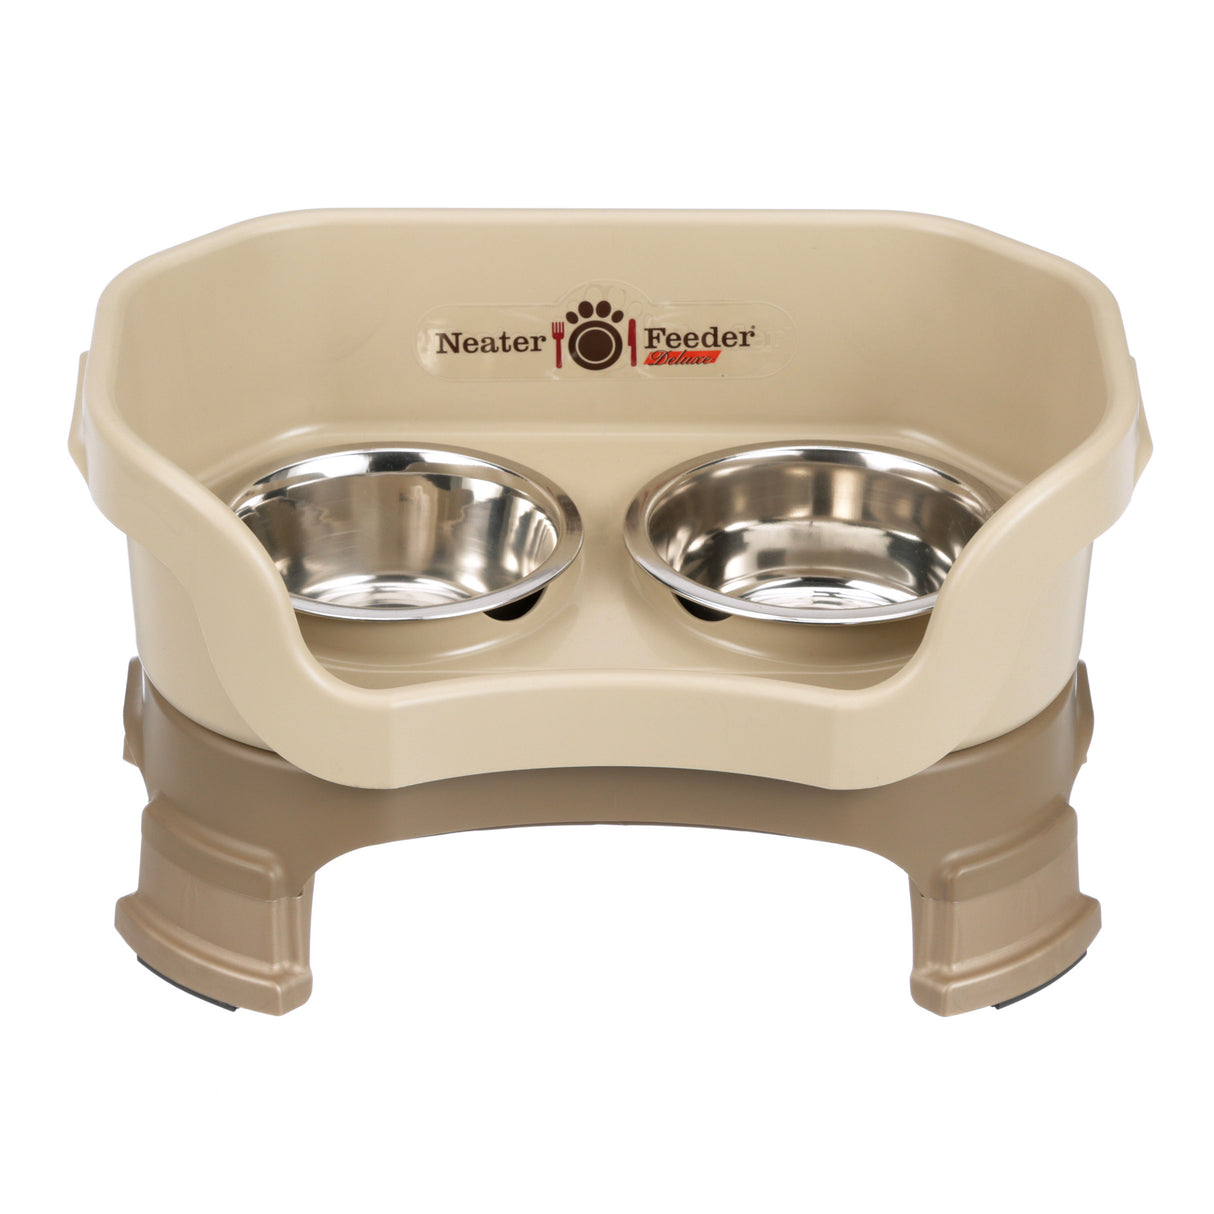 Deluxe Small Neater Feeder with leg extensions in Cappuccino